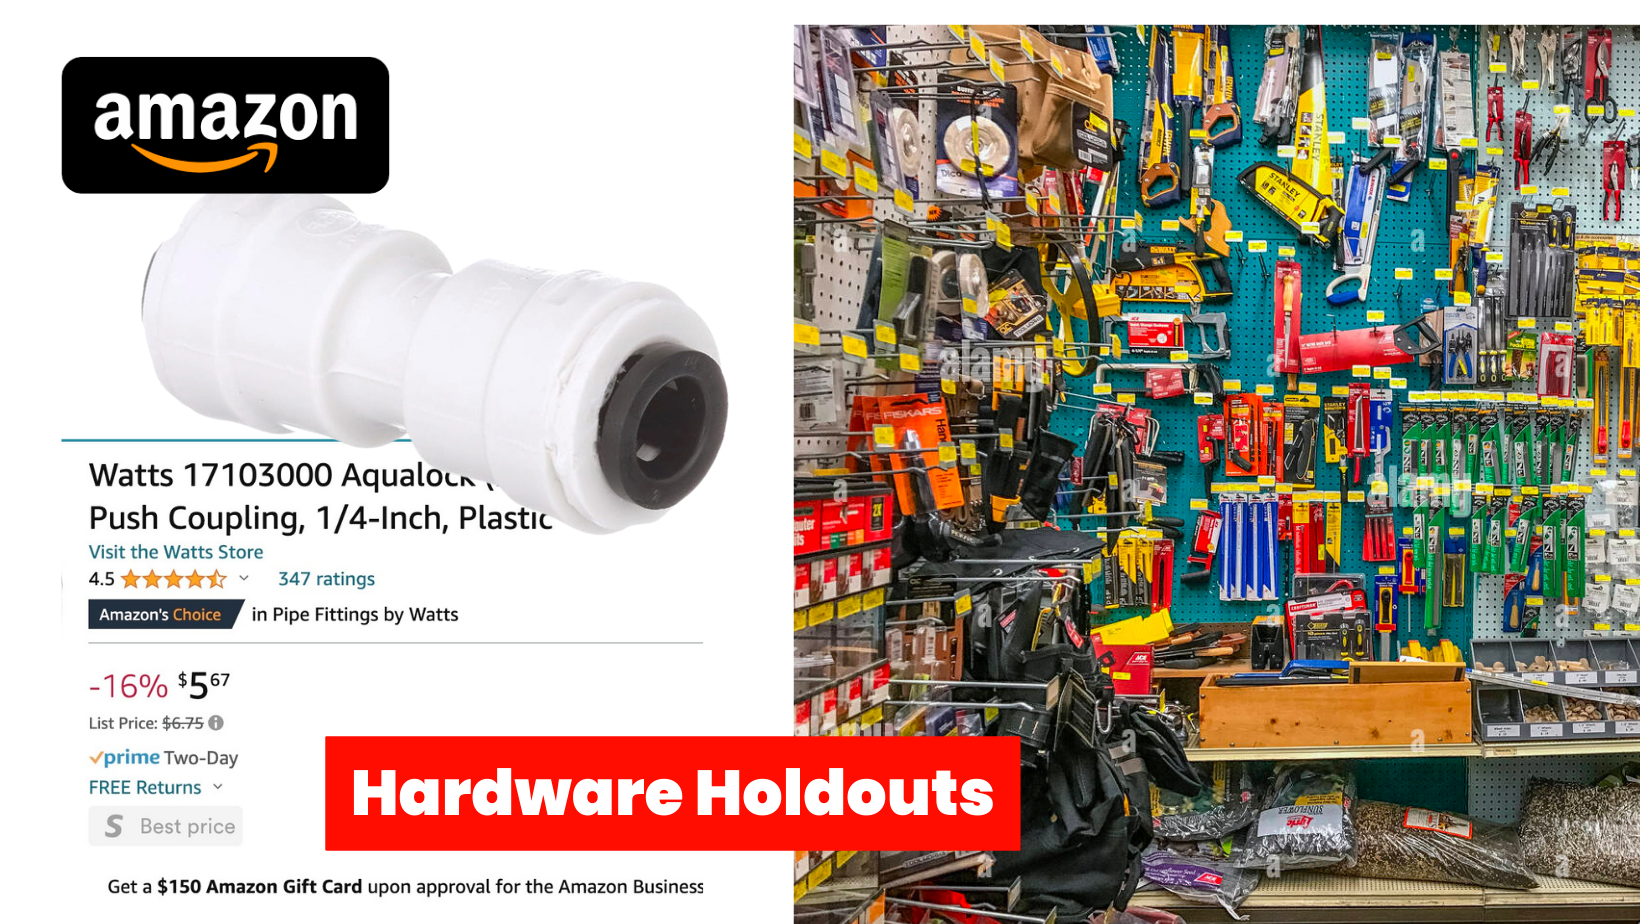 Hardware Holdouts: Why Amazon Is Winning The Hardware Store Wars | DeviceDaily.com